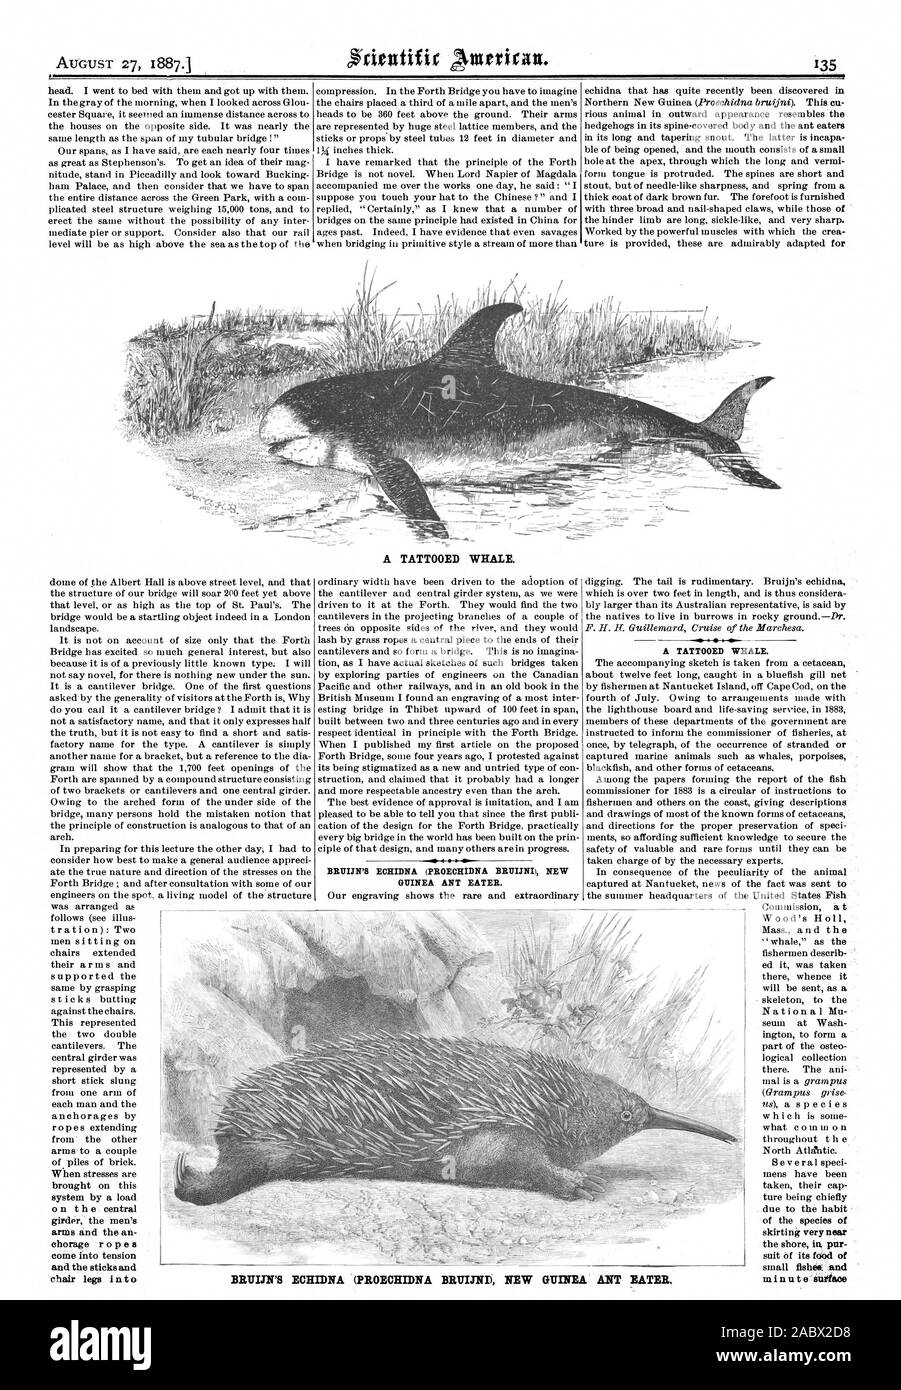 GUINEA ANT EATER. A TATTOOED WHALE. small fishes: and  BRUIJN'S ECHIDNA (PROECHIDNA BRIIIJND NEW GUINEA ANT EATER, scientific american, 1887-08-27 Stock Photo